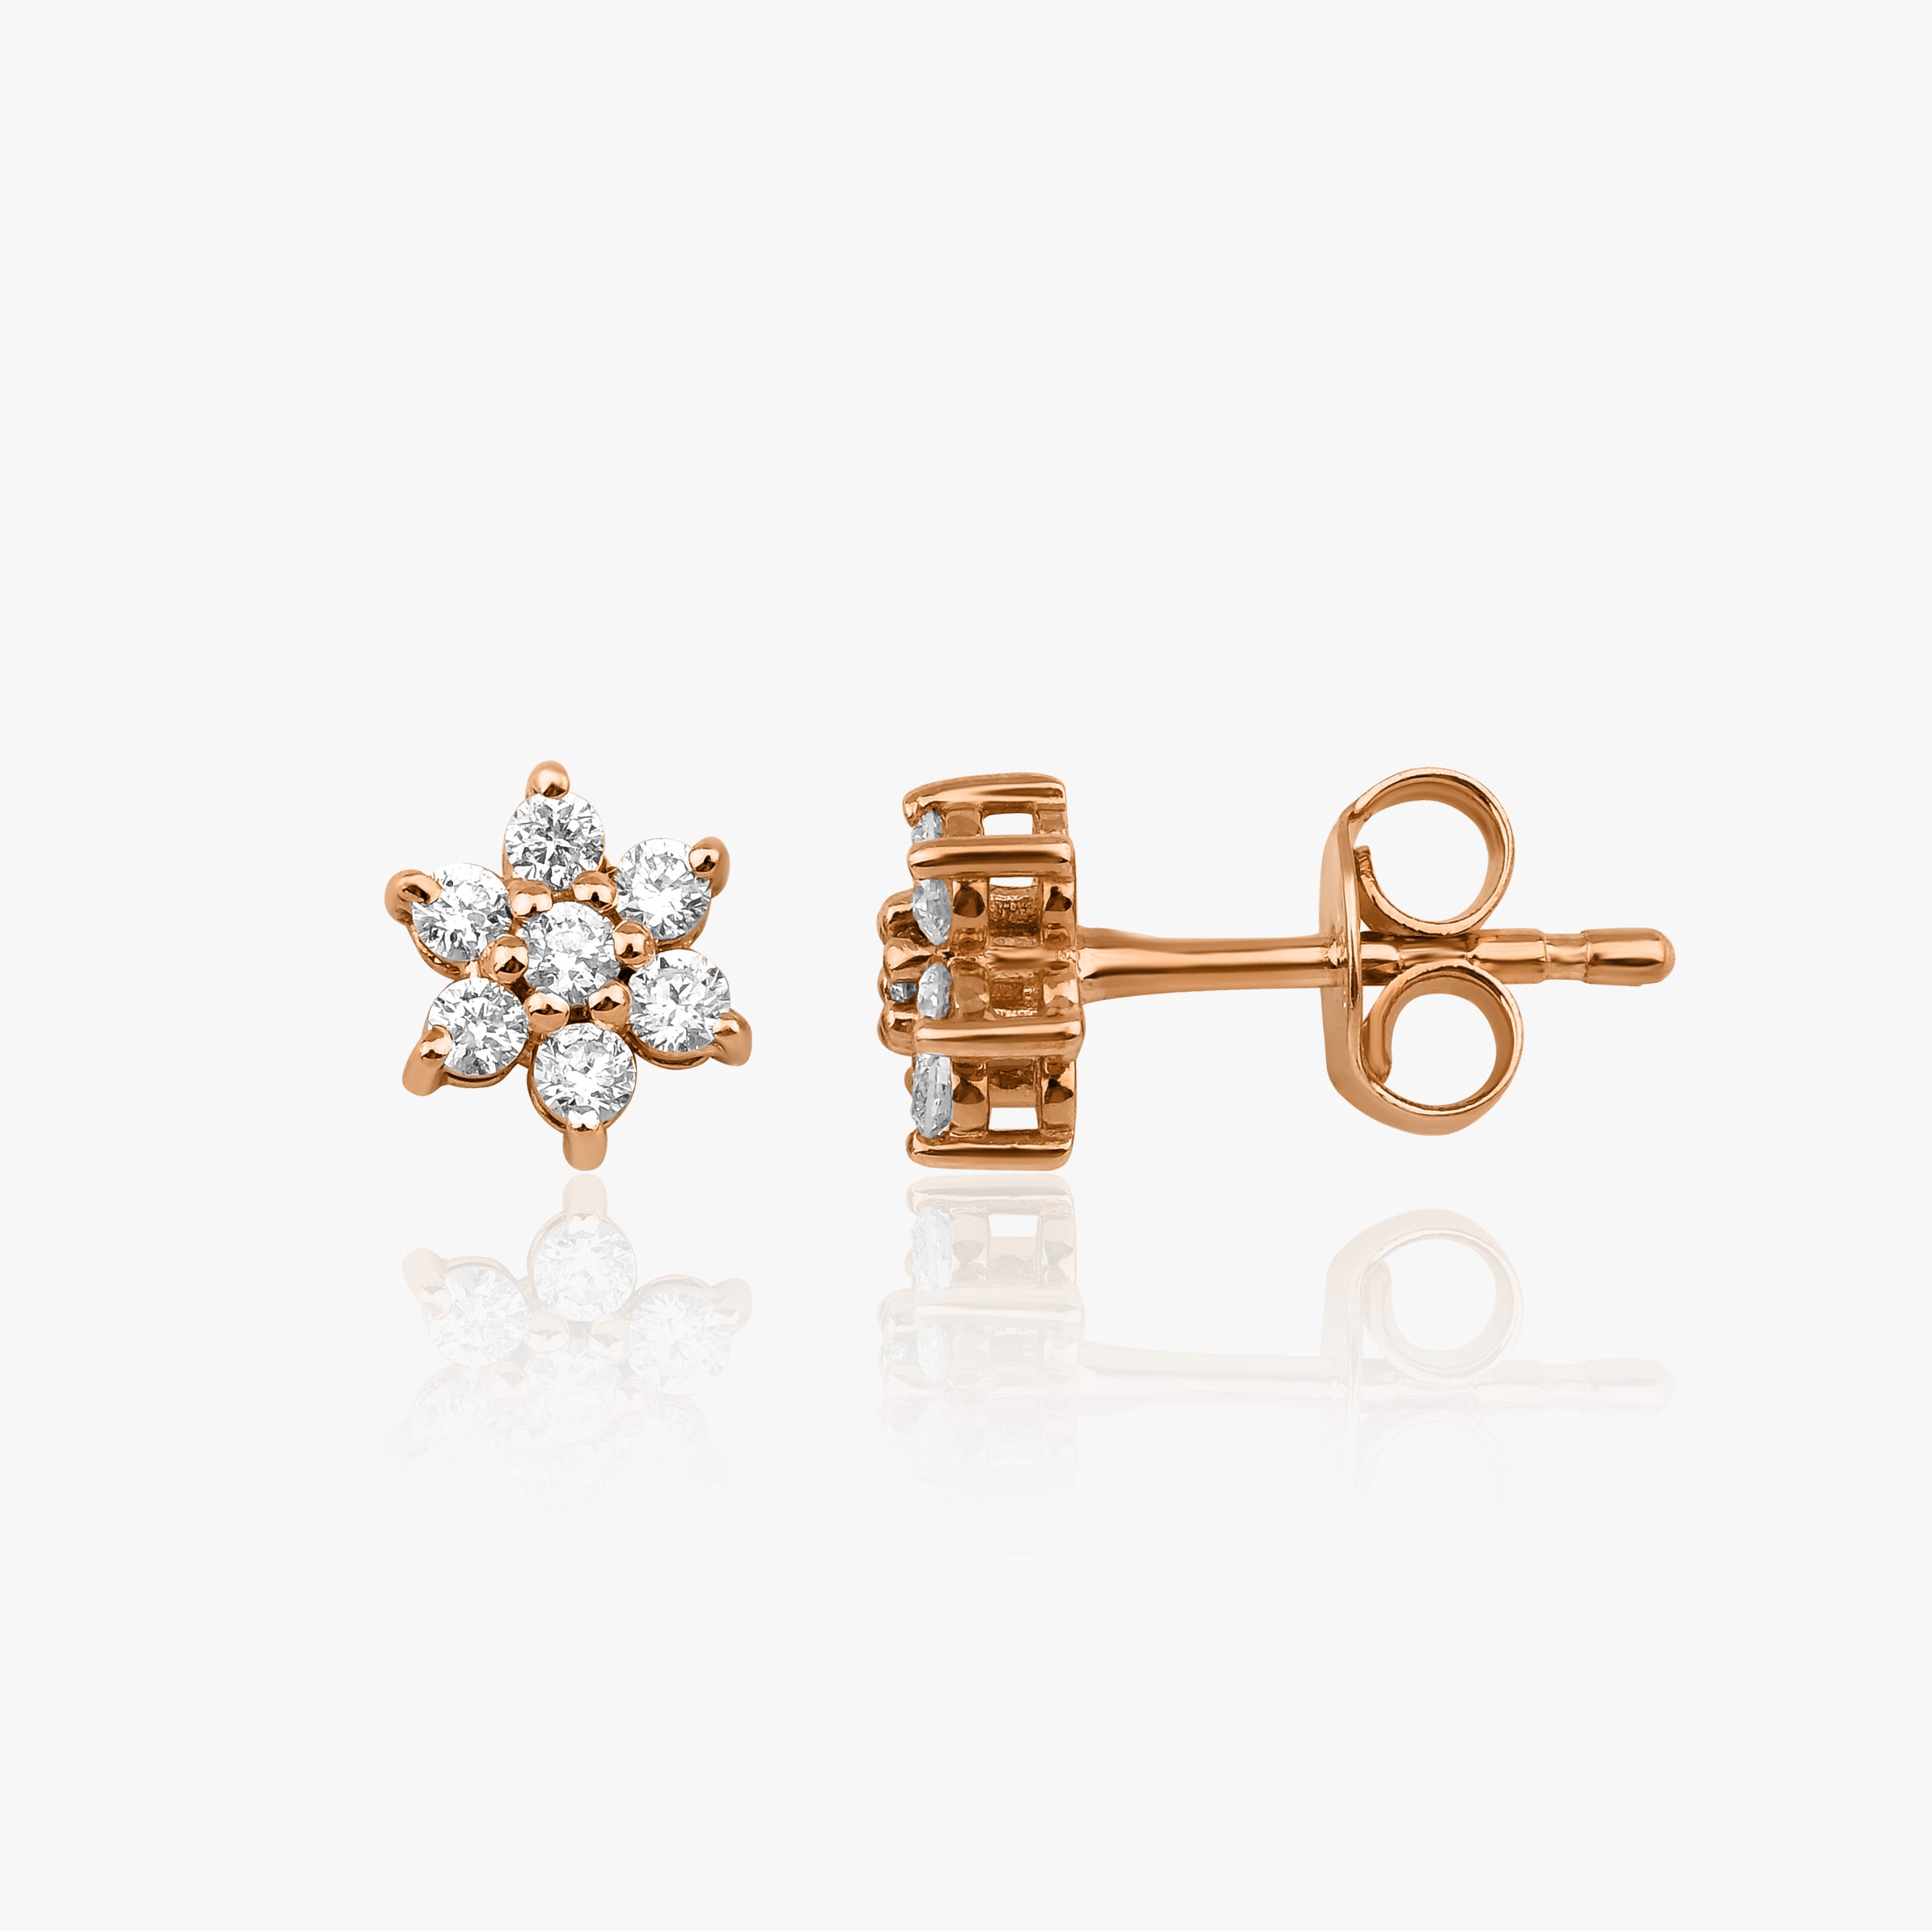 Dainty Diamond Hexagon Studs Available in 14K and 18K Gold